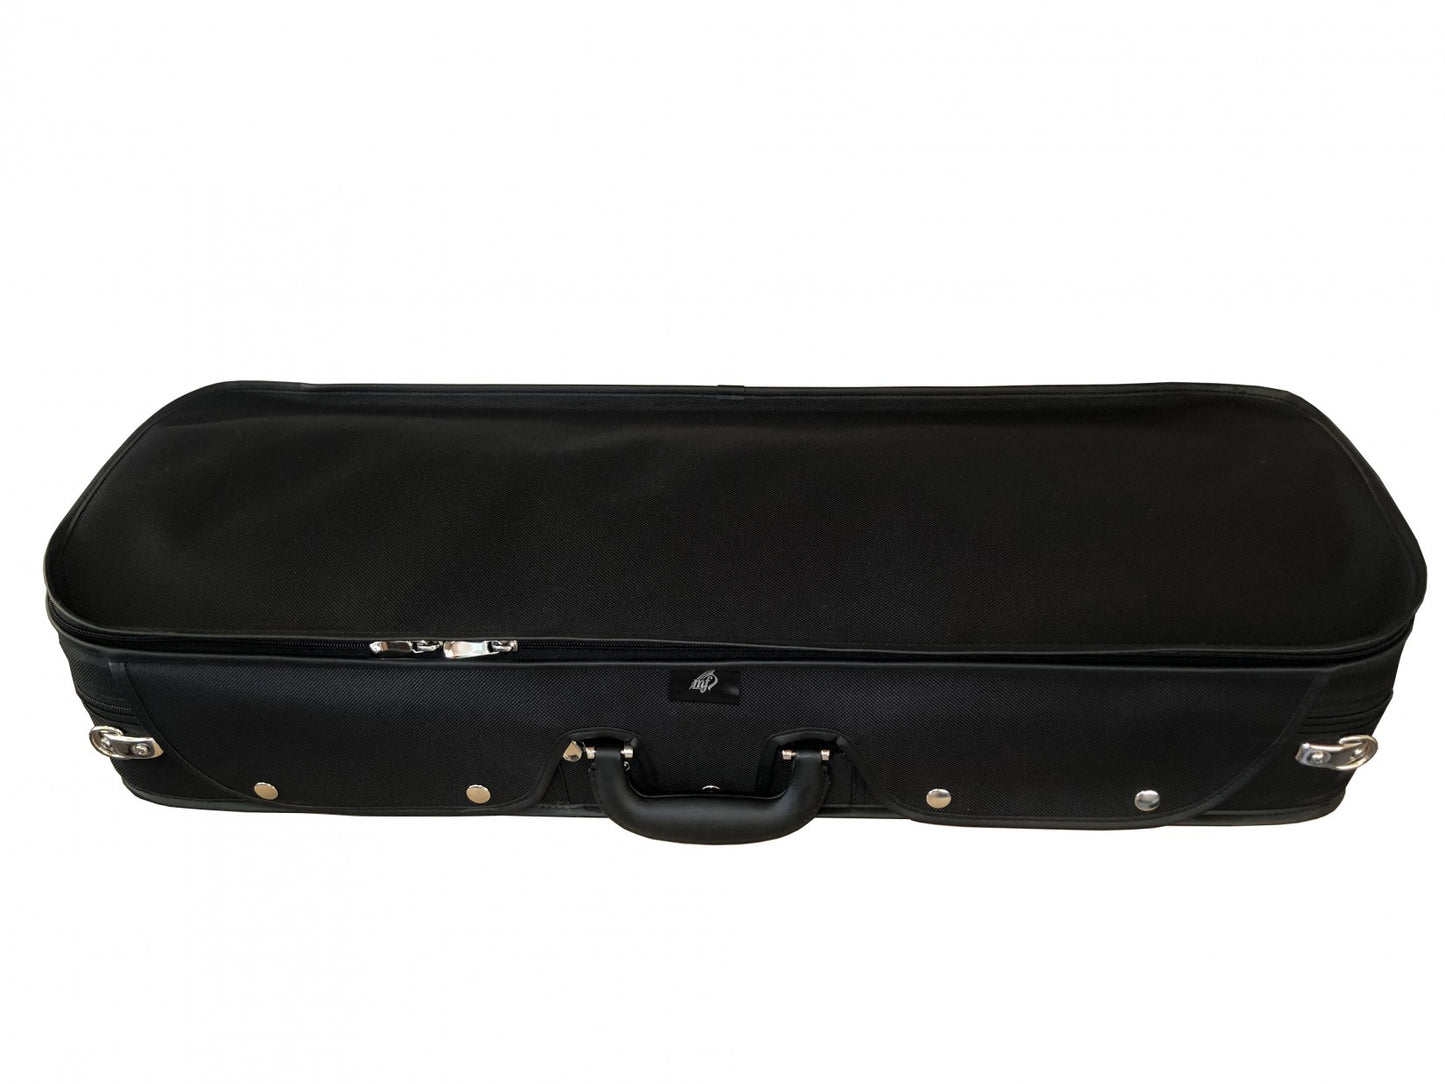 Viola case, wooden core, adjustable, all sizes